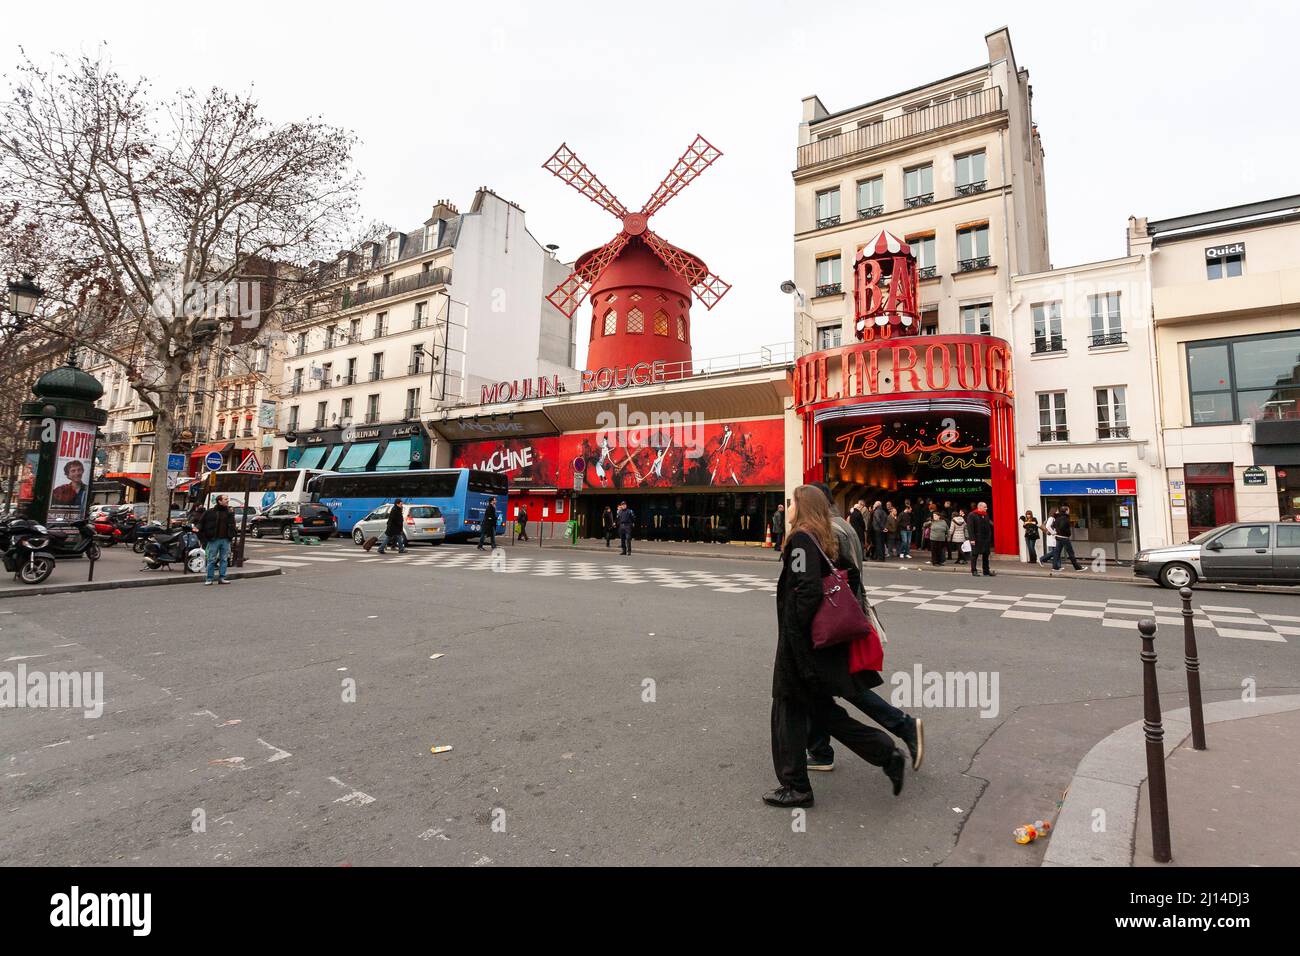 Paris, France - 21 February, 2010: Cabaret Moulin Rouge with red mill in Paris district Montmartre. Stock Photo